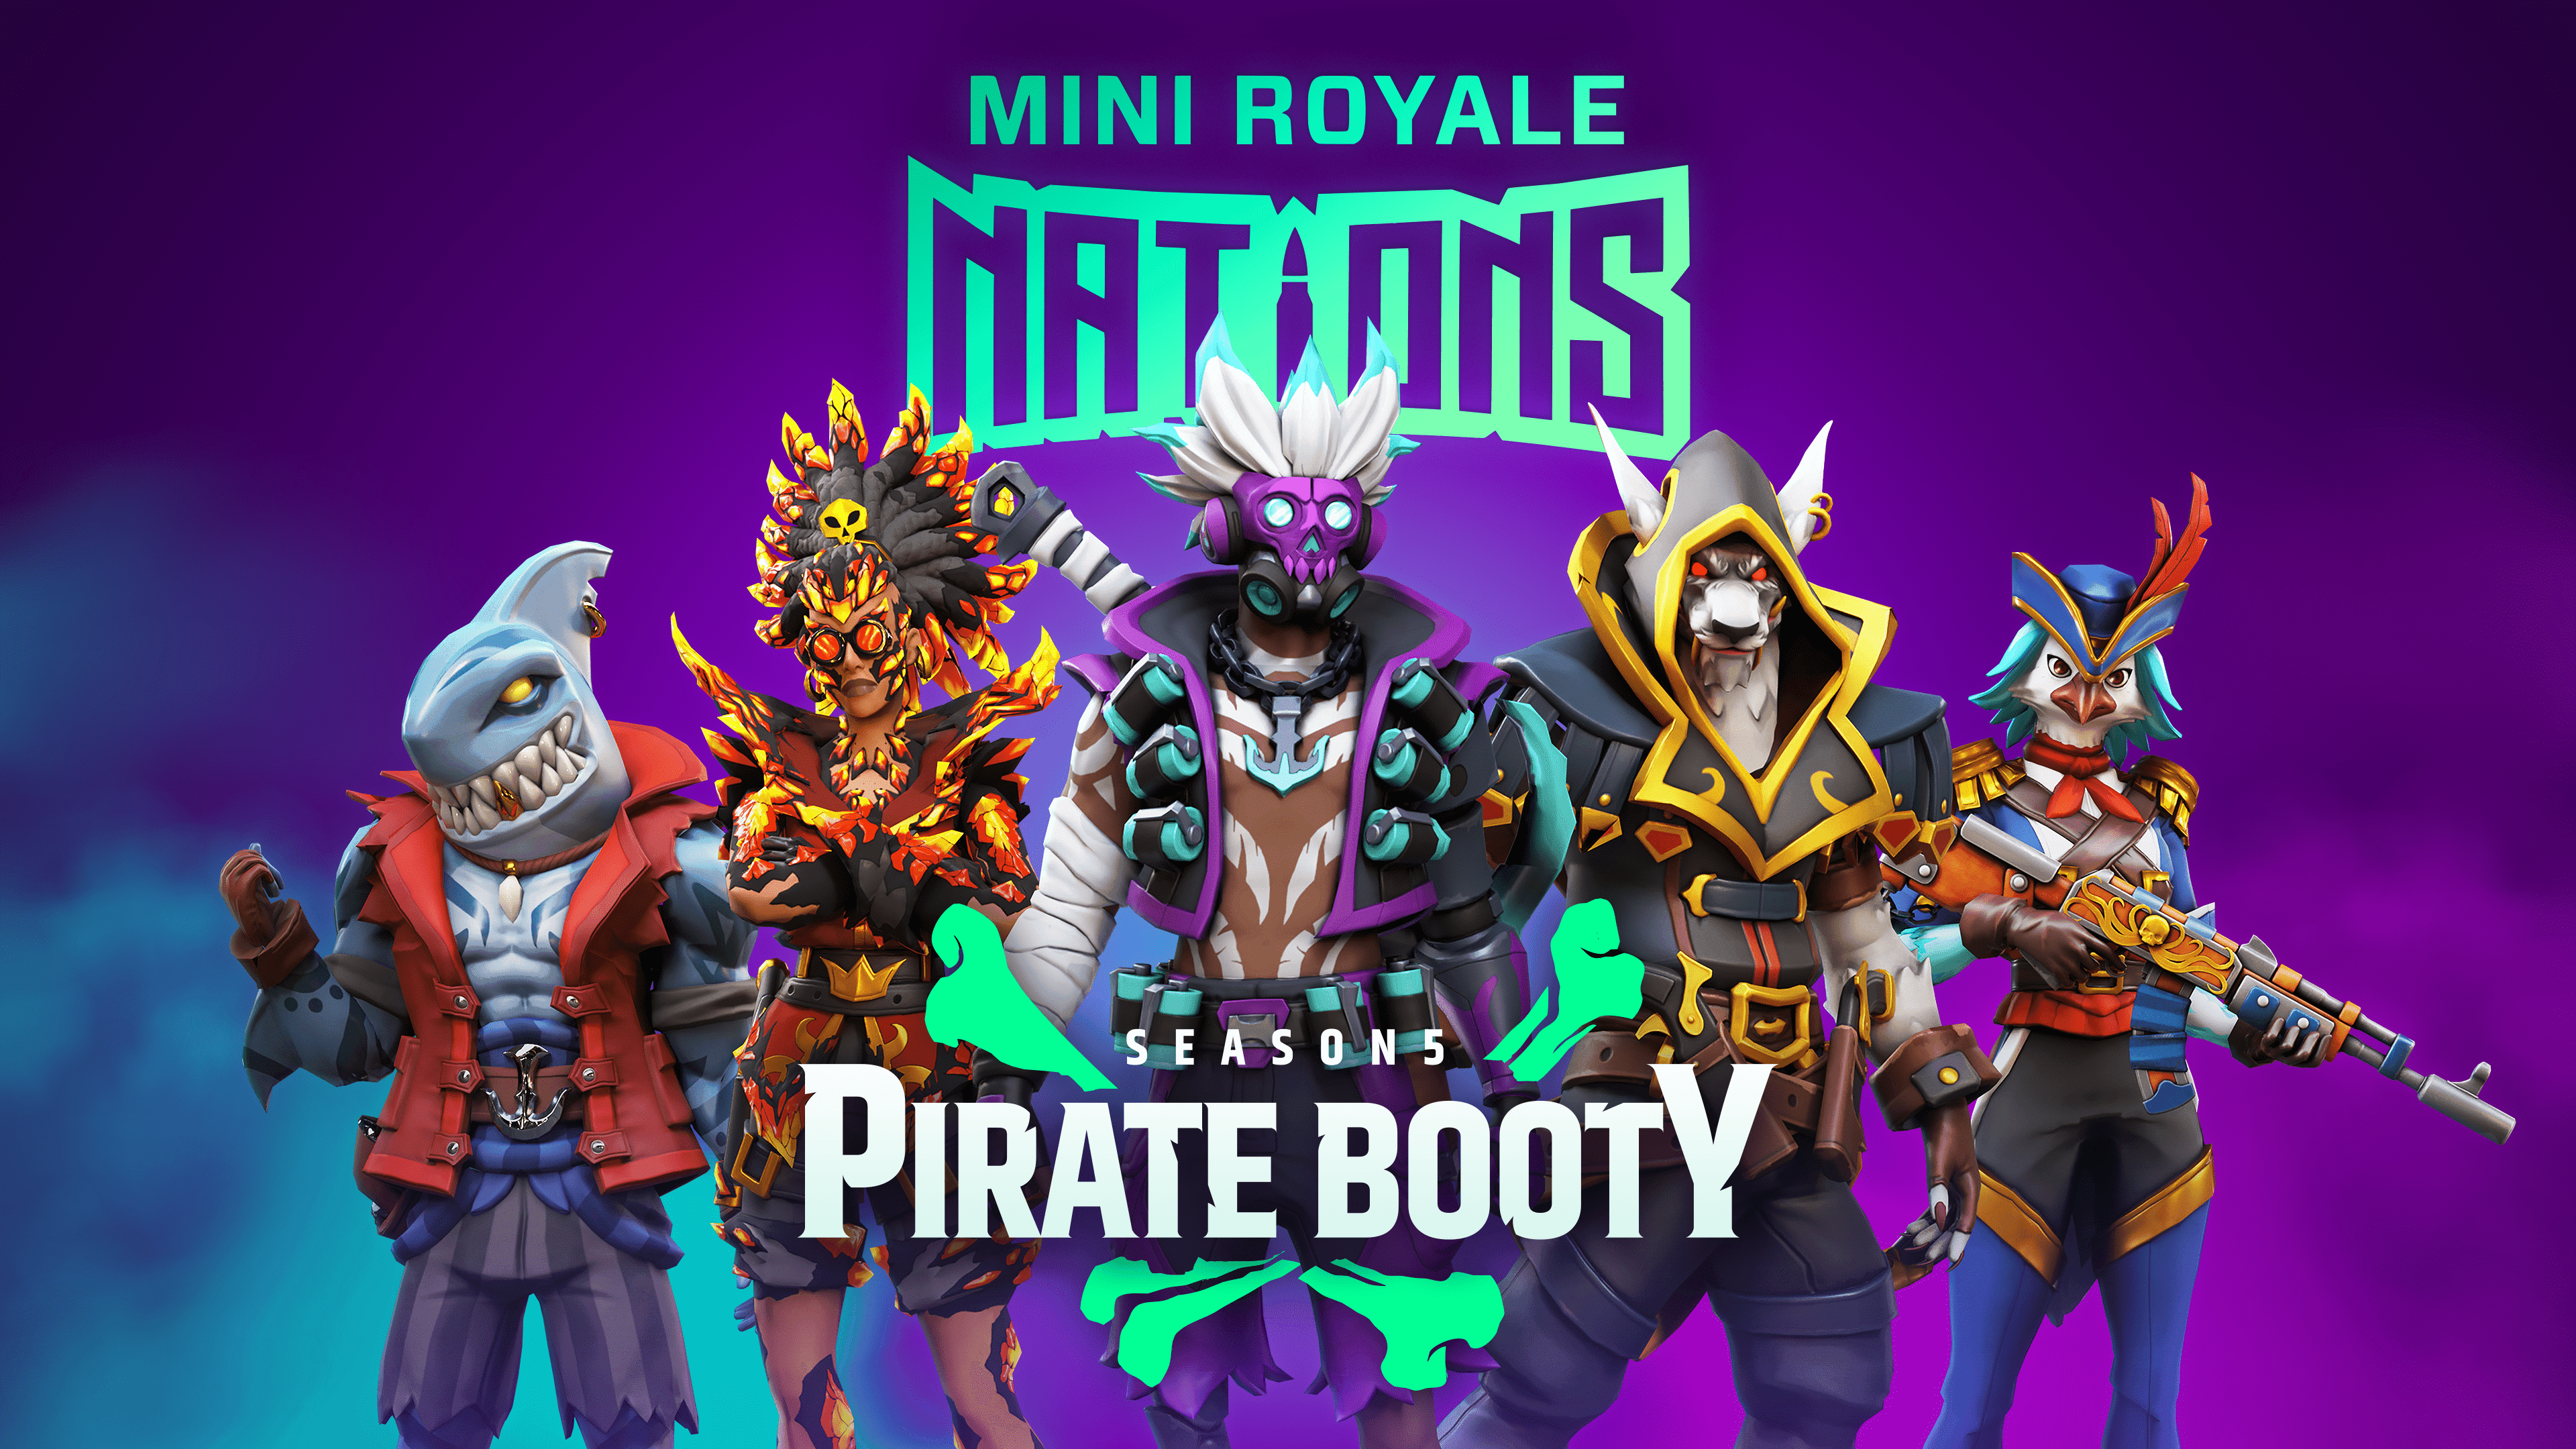 Mini Royale: Nations S5: Pirate Booty Launches June 29th